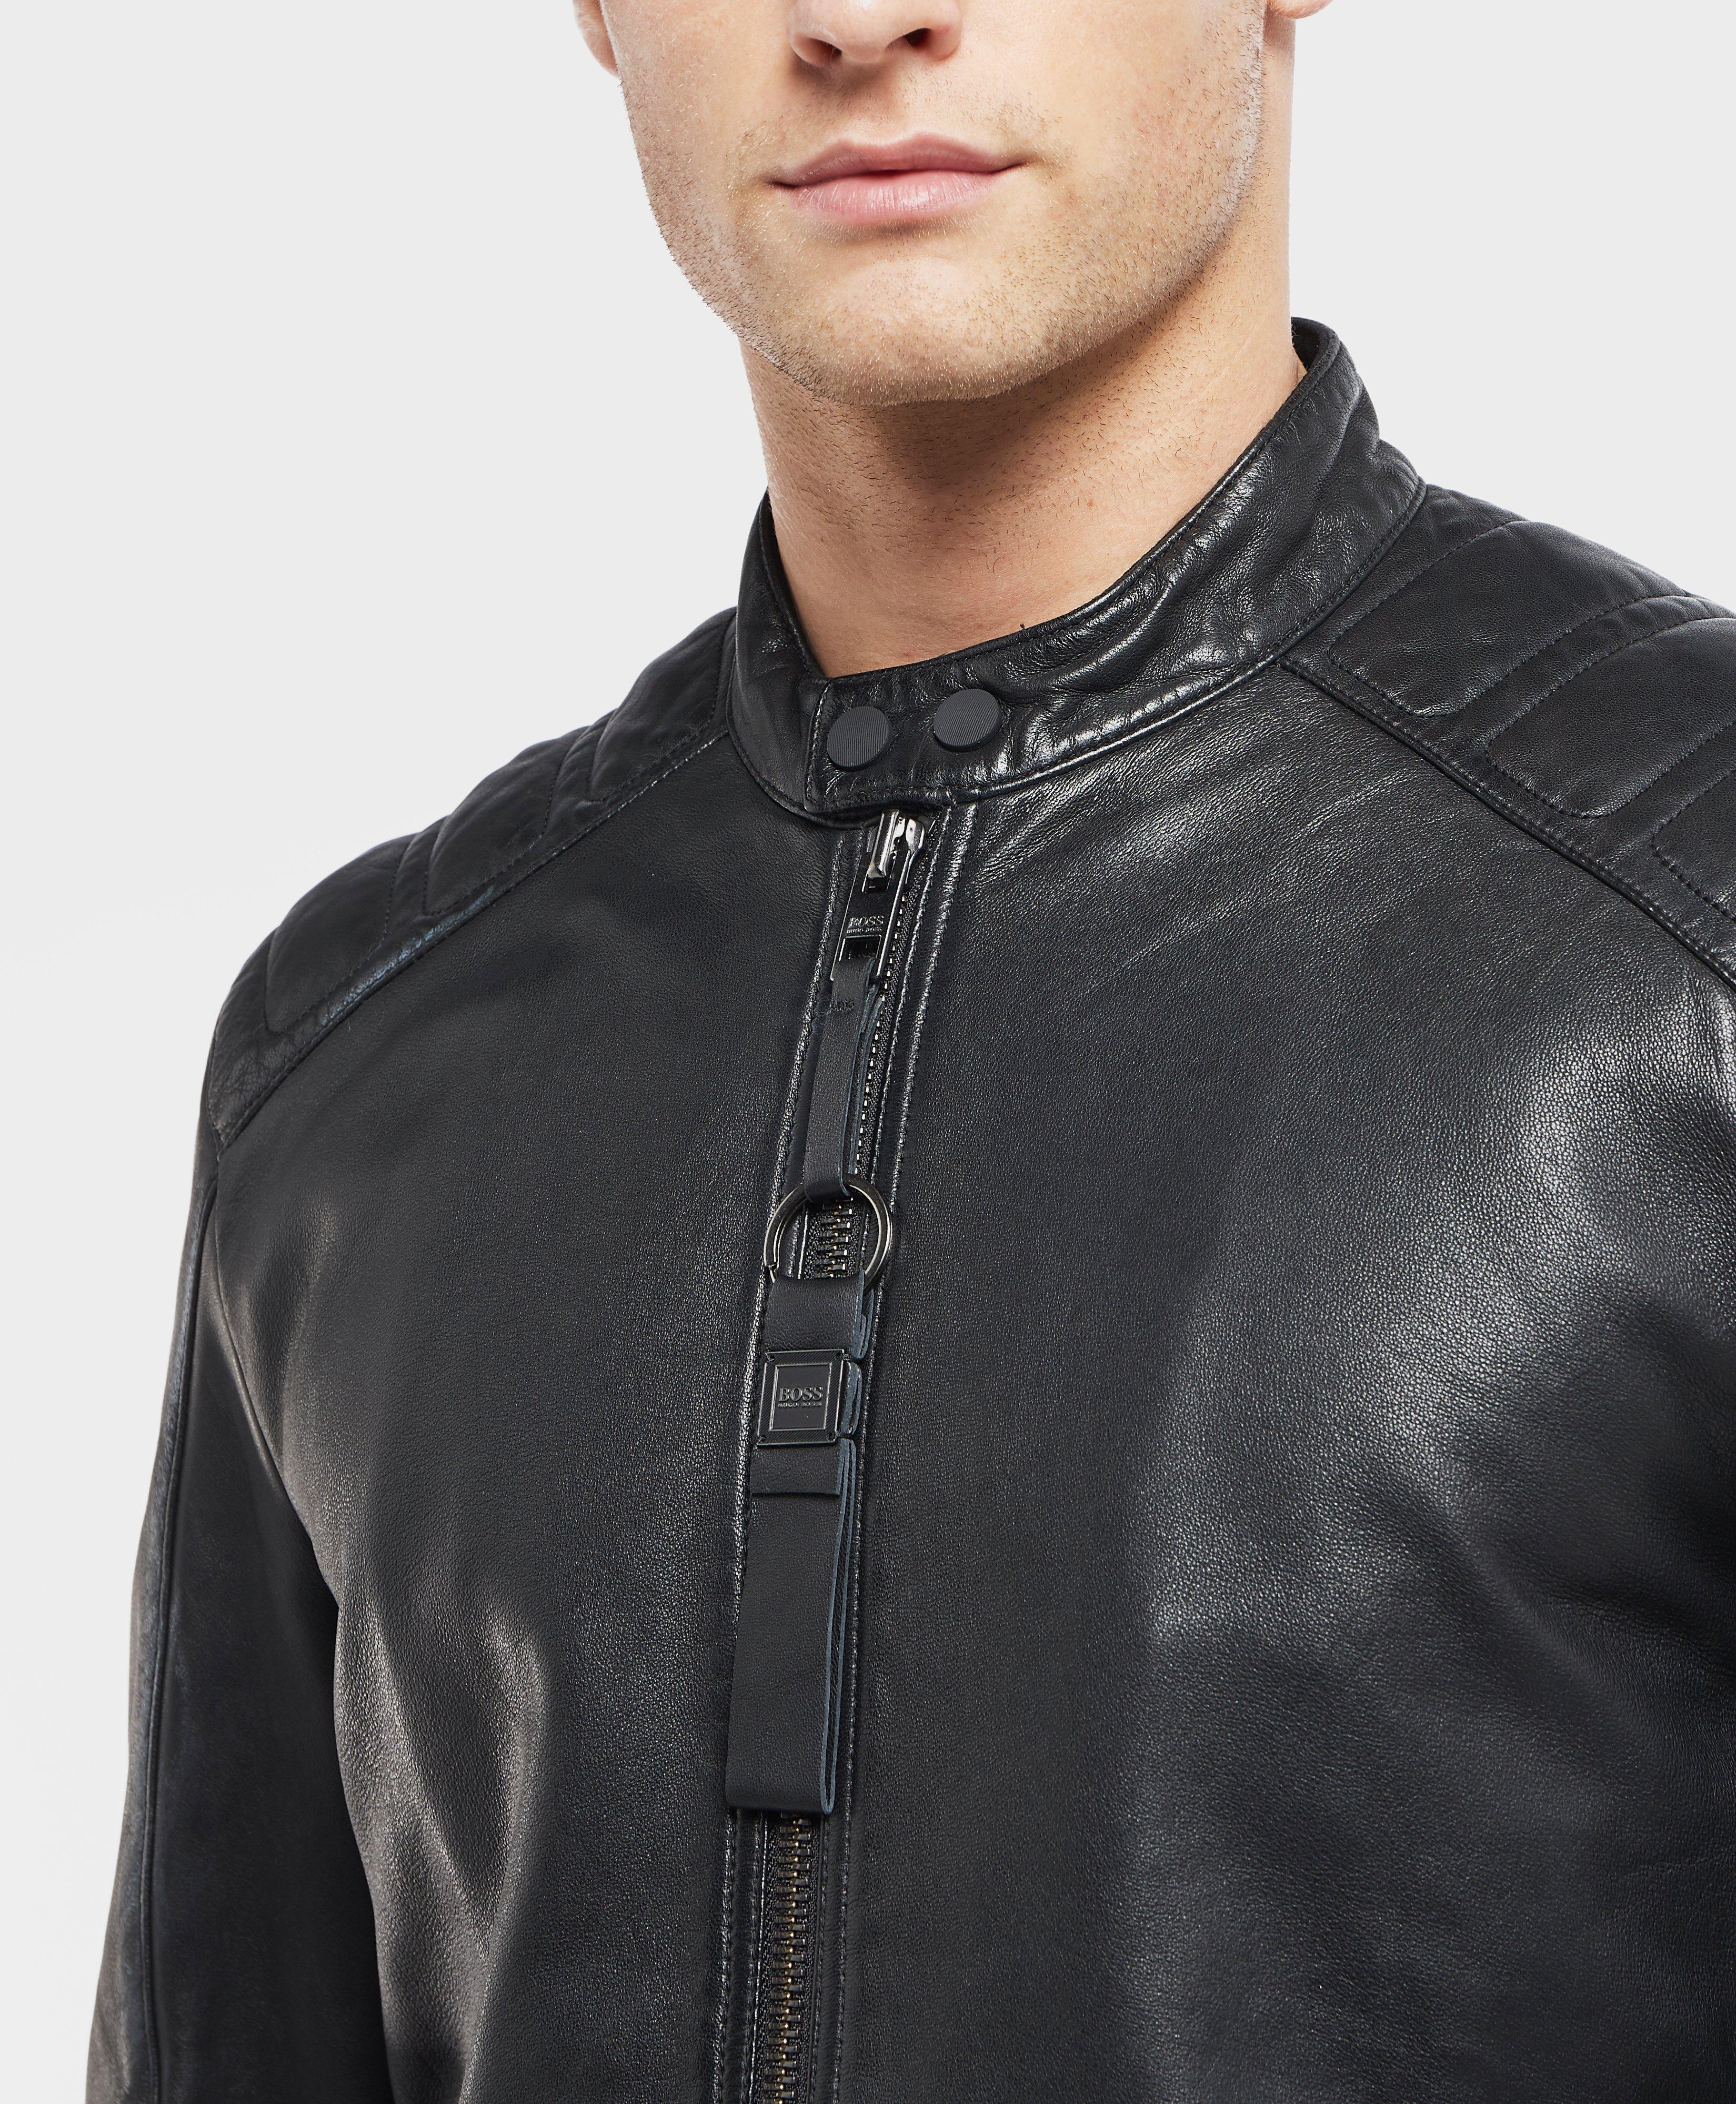 hugo boss jagson leather jacket OFF 63% - Online Shopping Site for Fashion  & Lifestyle.